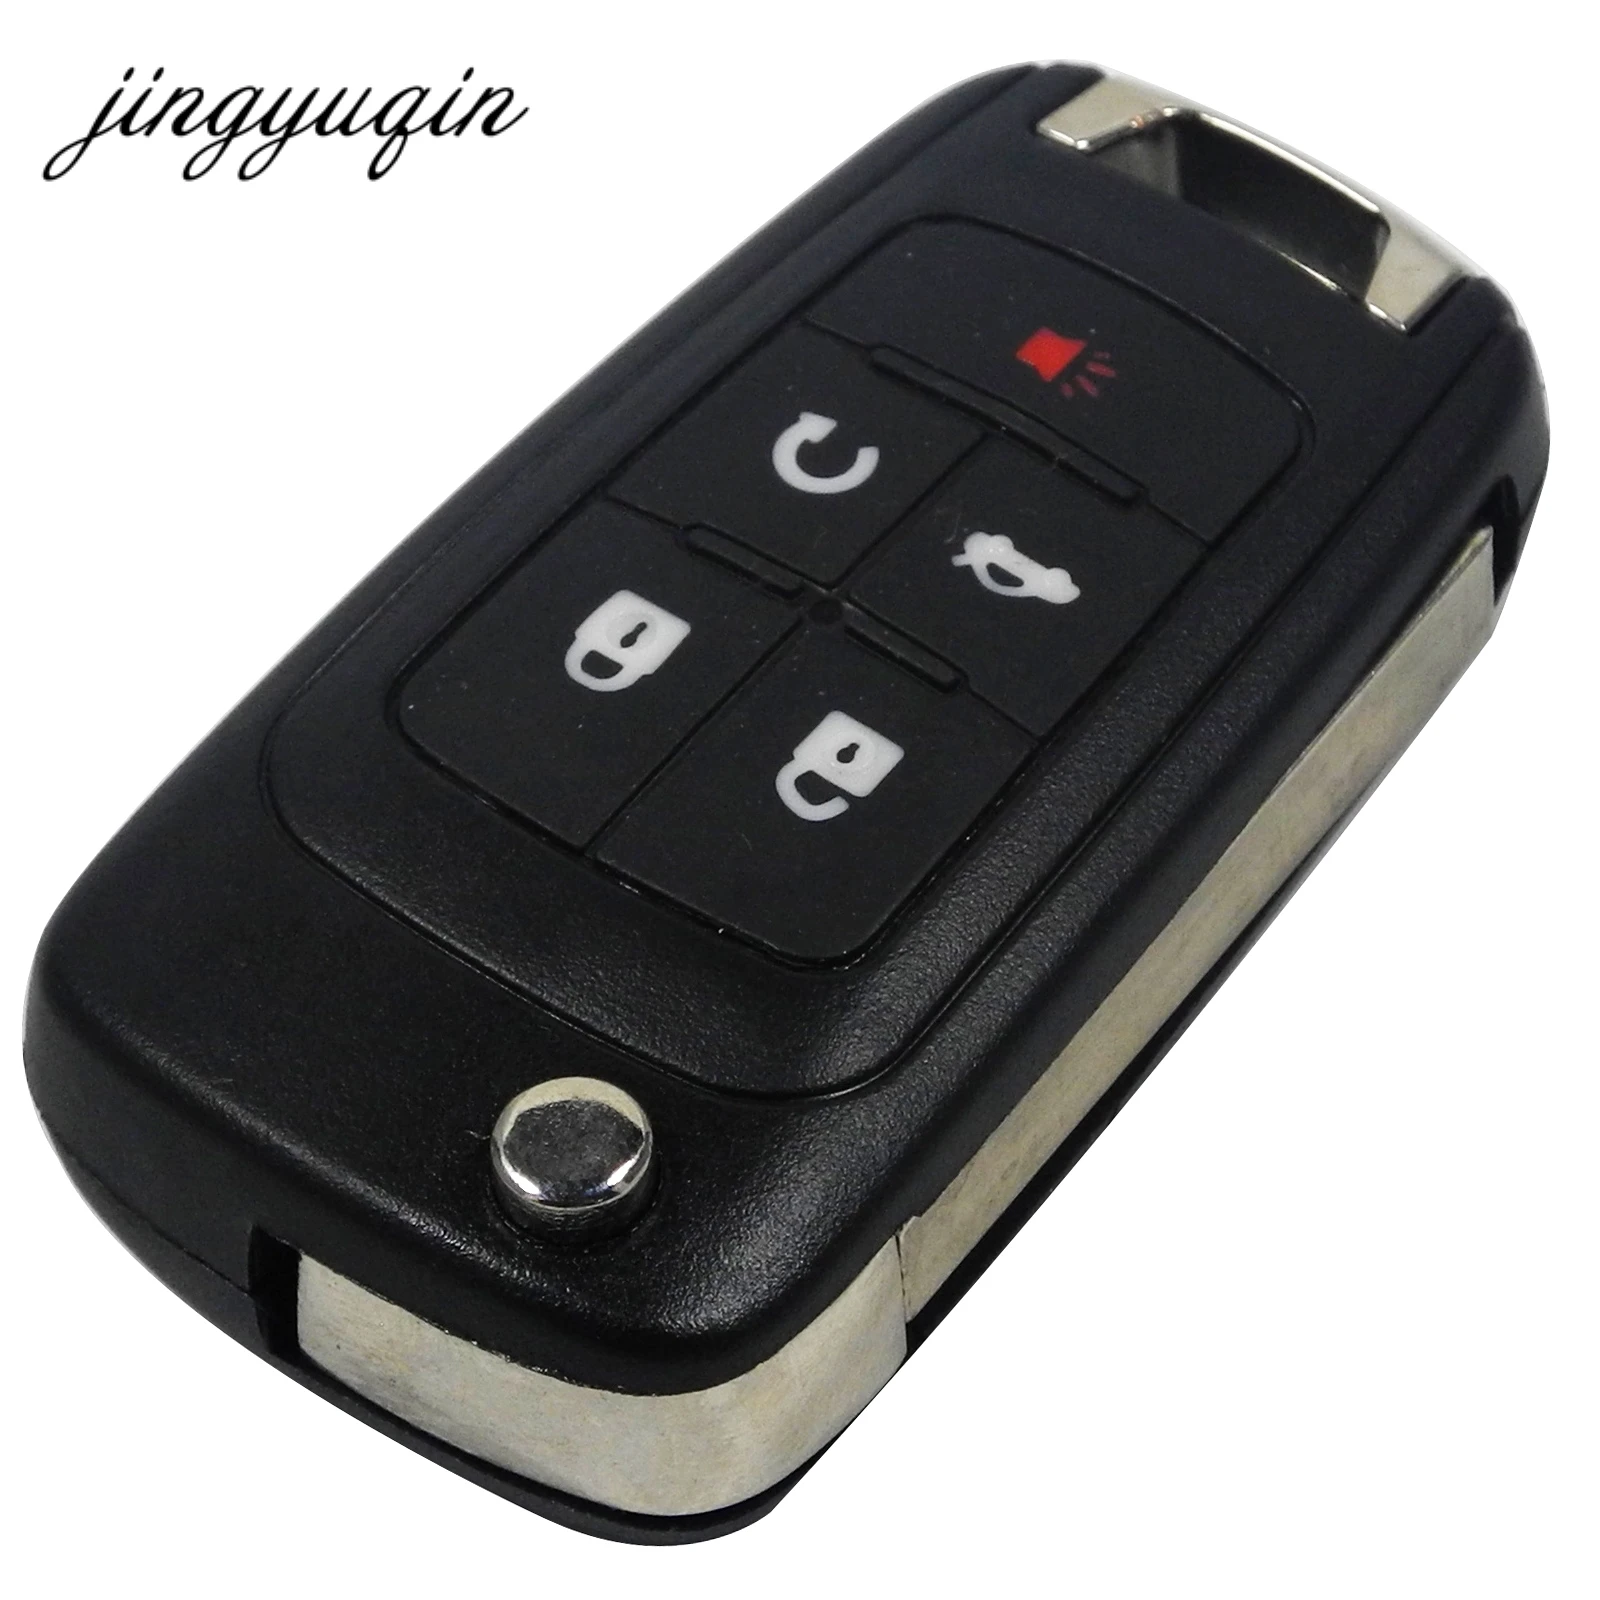 

jingyuqin Flip Folding Remote Key Shell 5 BTN for Vauxhall Opel for Buick Excelle Verano LaCrosse Regal Housing Fob Case